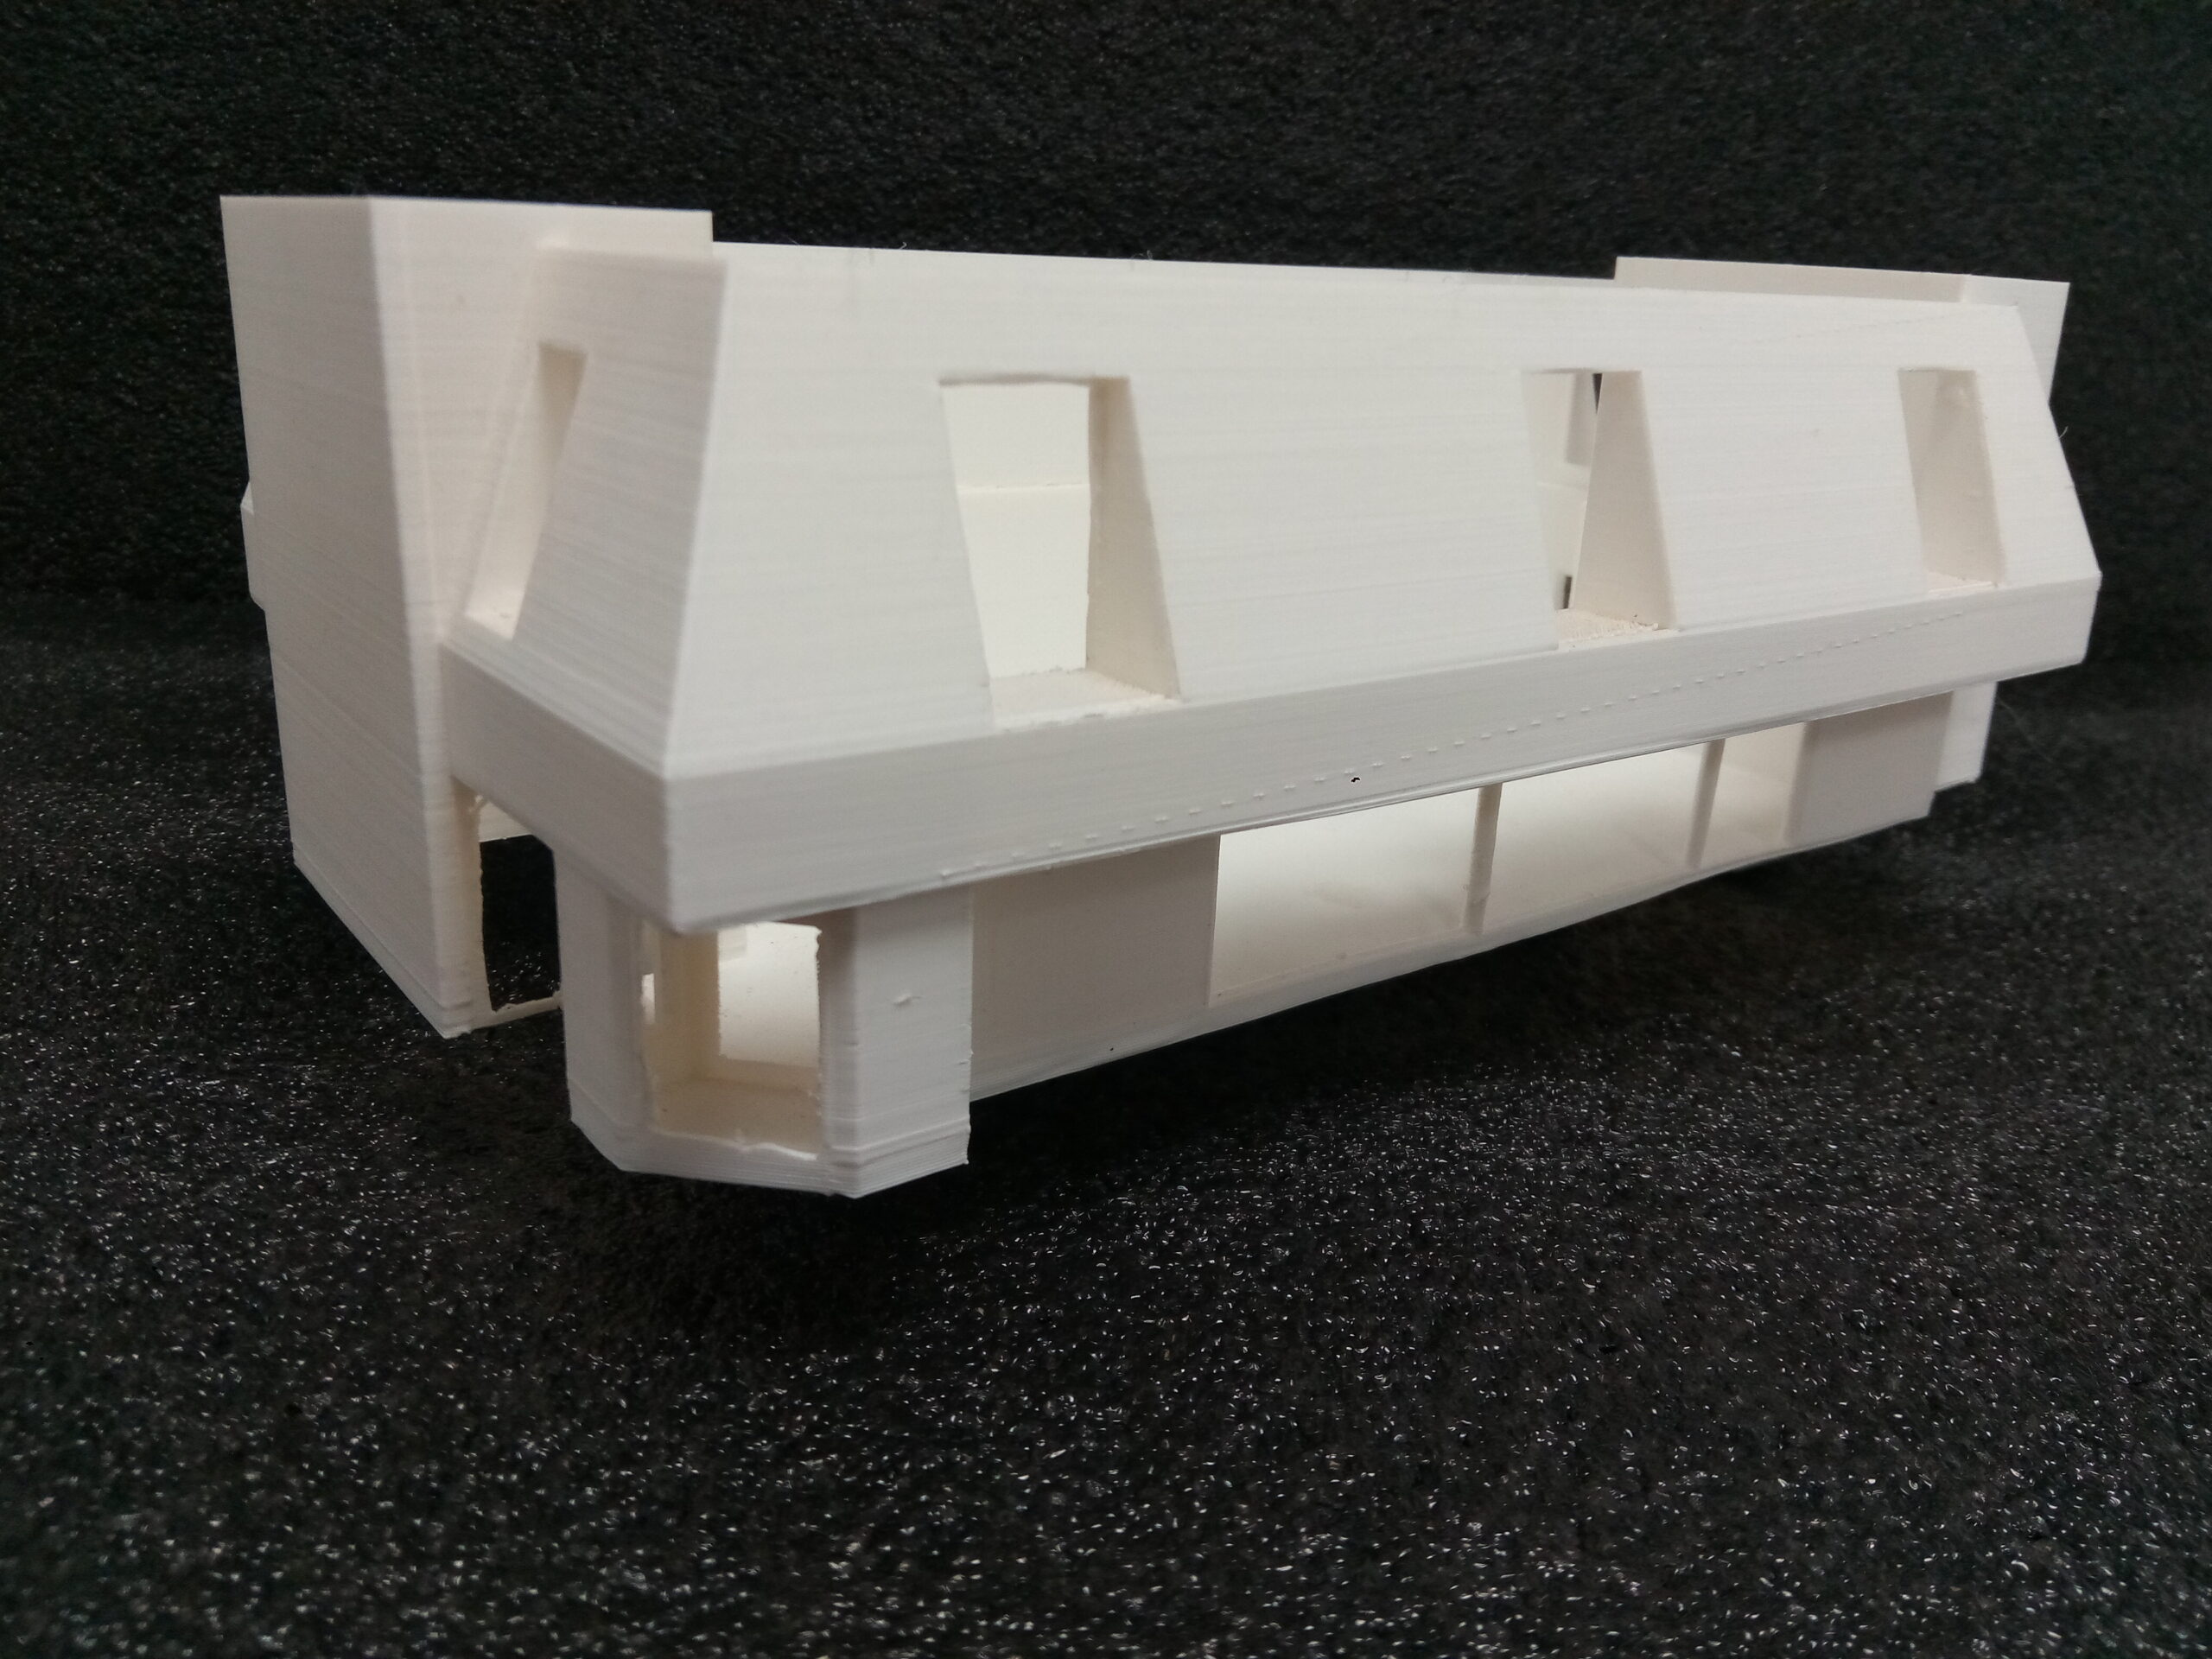 3D Printing Prototype of White Architectural Blueprints